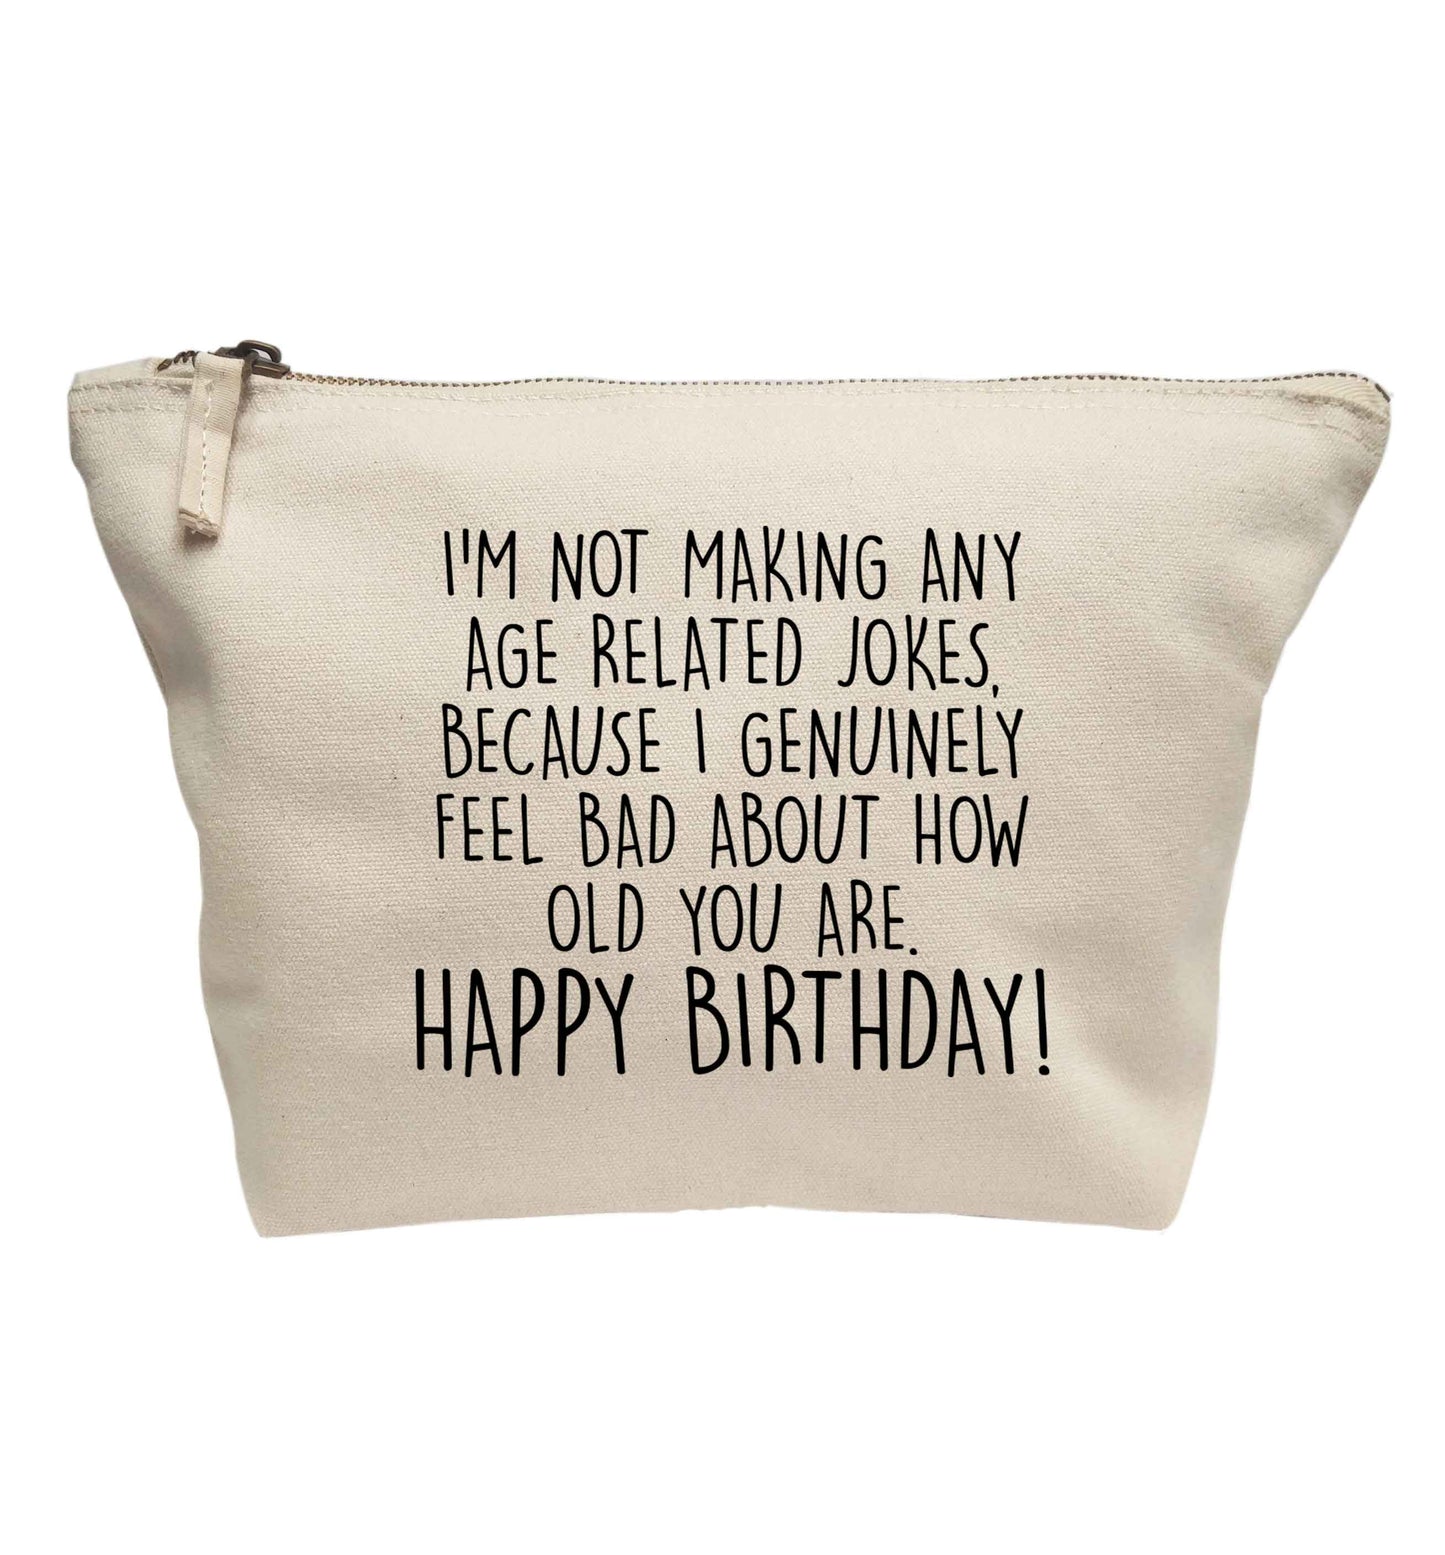 I'm not making any age related jokes because I genuinely feel bad for how old you are | Makeup / wash bag